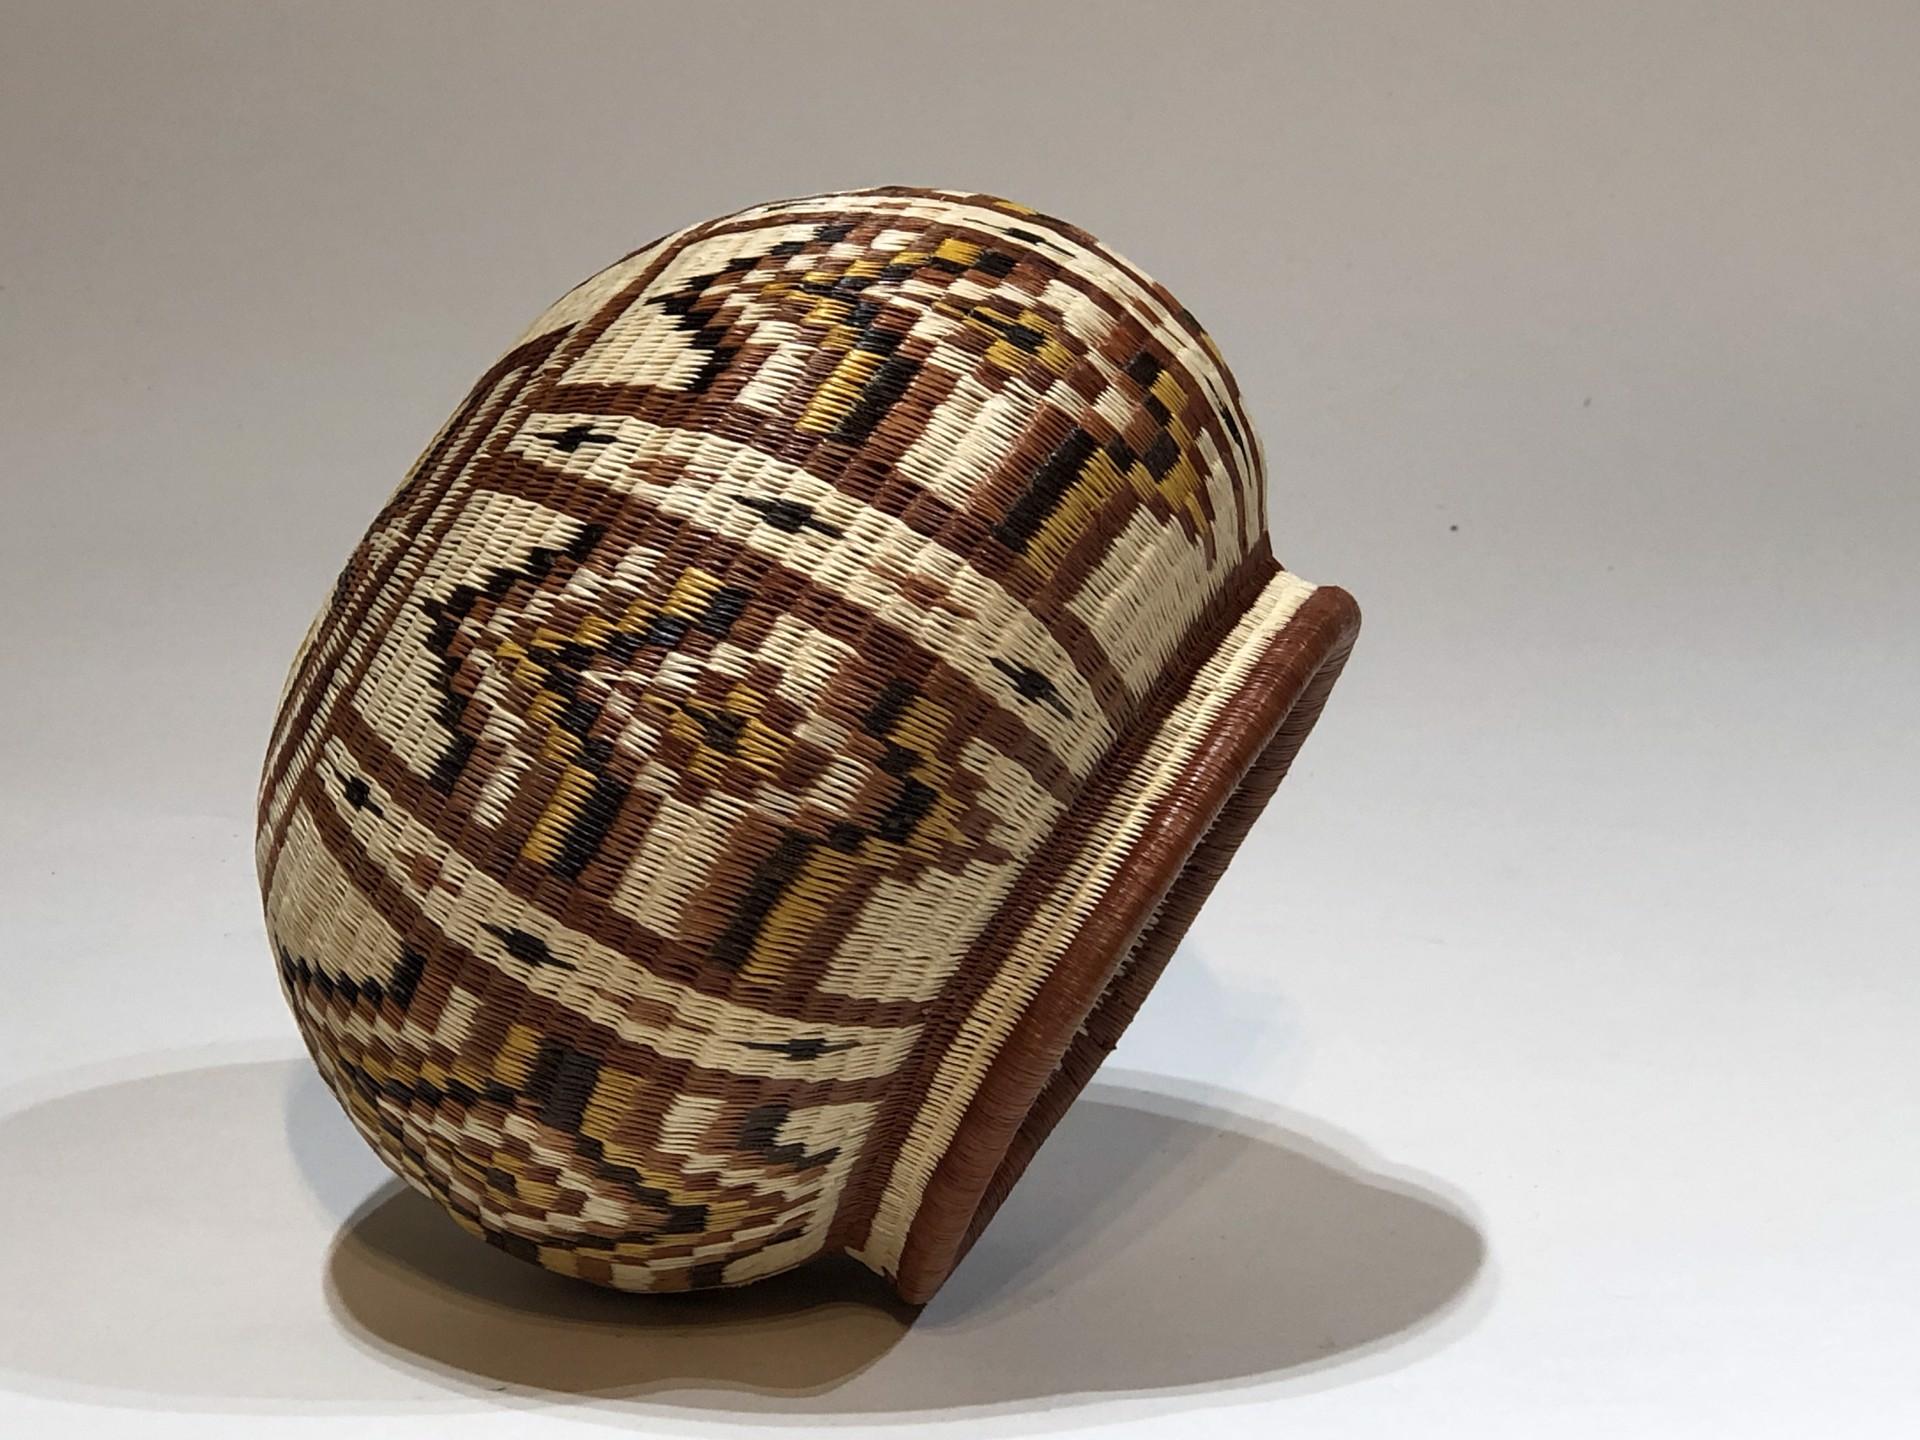 Red Gold black and White geometric basket sw584(1209) by Wounaan & Embera Panama Rainforest Baskets Wounaan